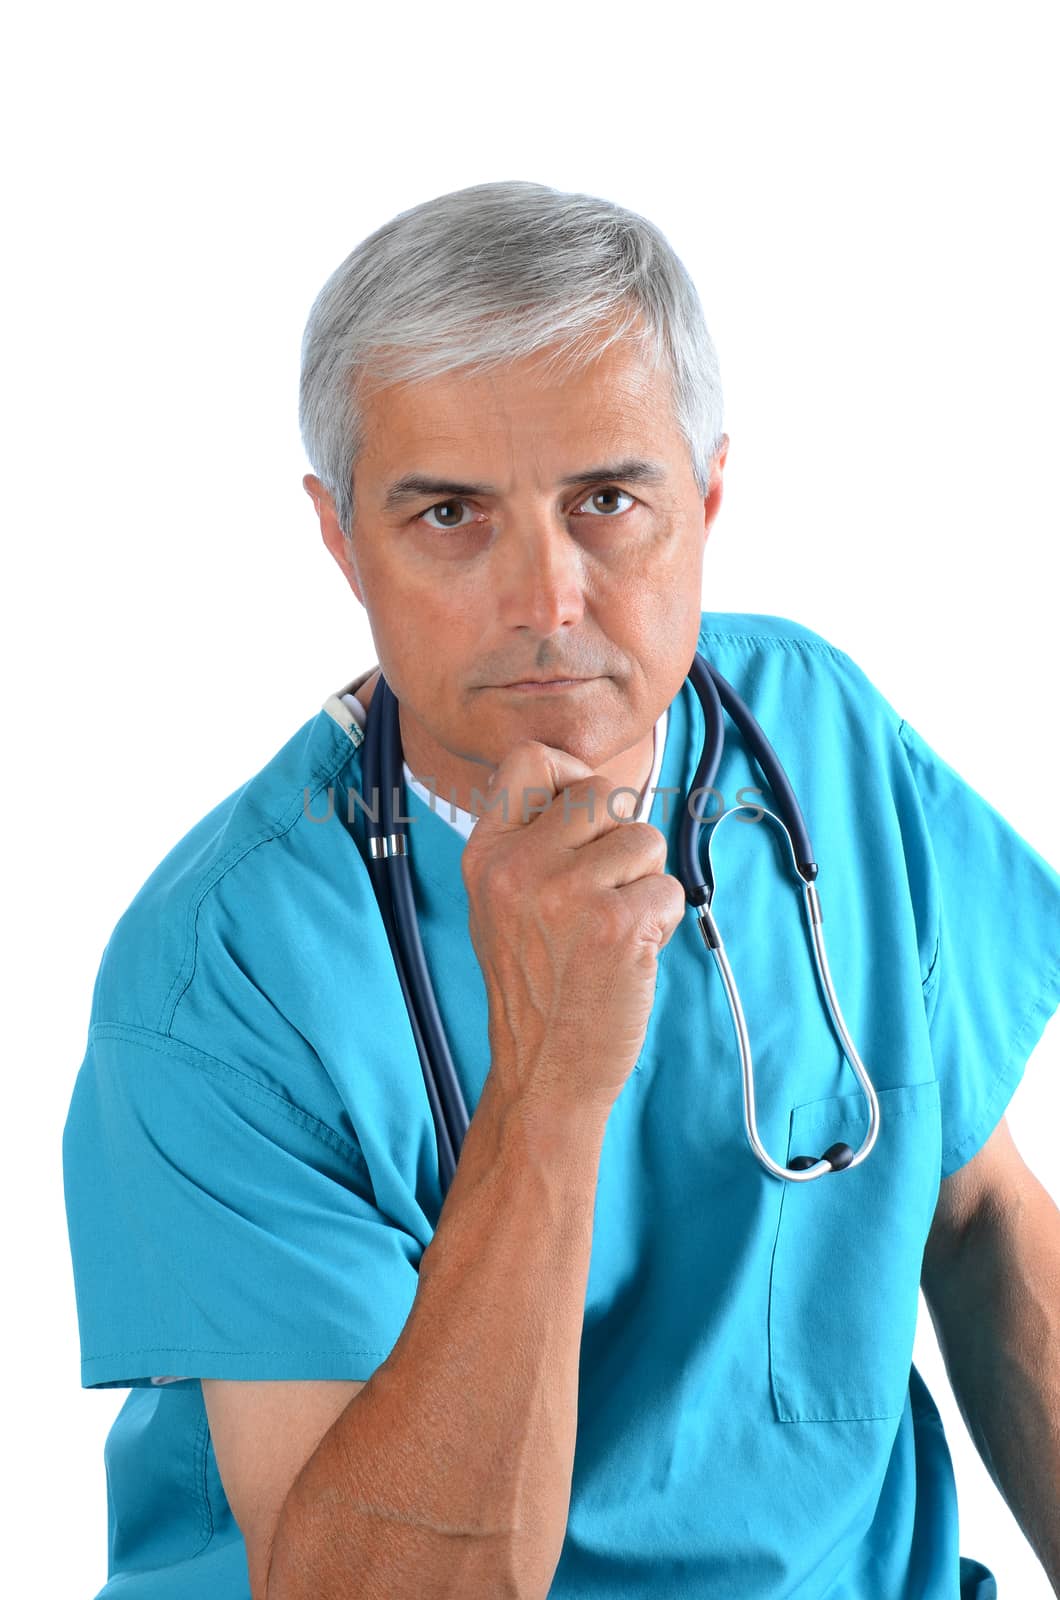 Serious middle aged doctor with his hand on his chin, Man is wearing scrubs with a stethoscope around his neck. Vertical Format over white.